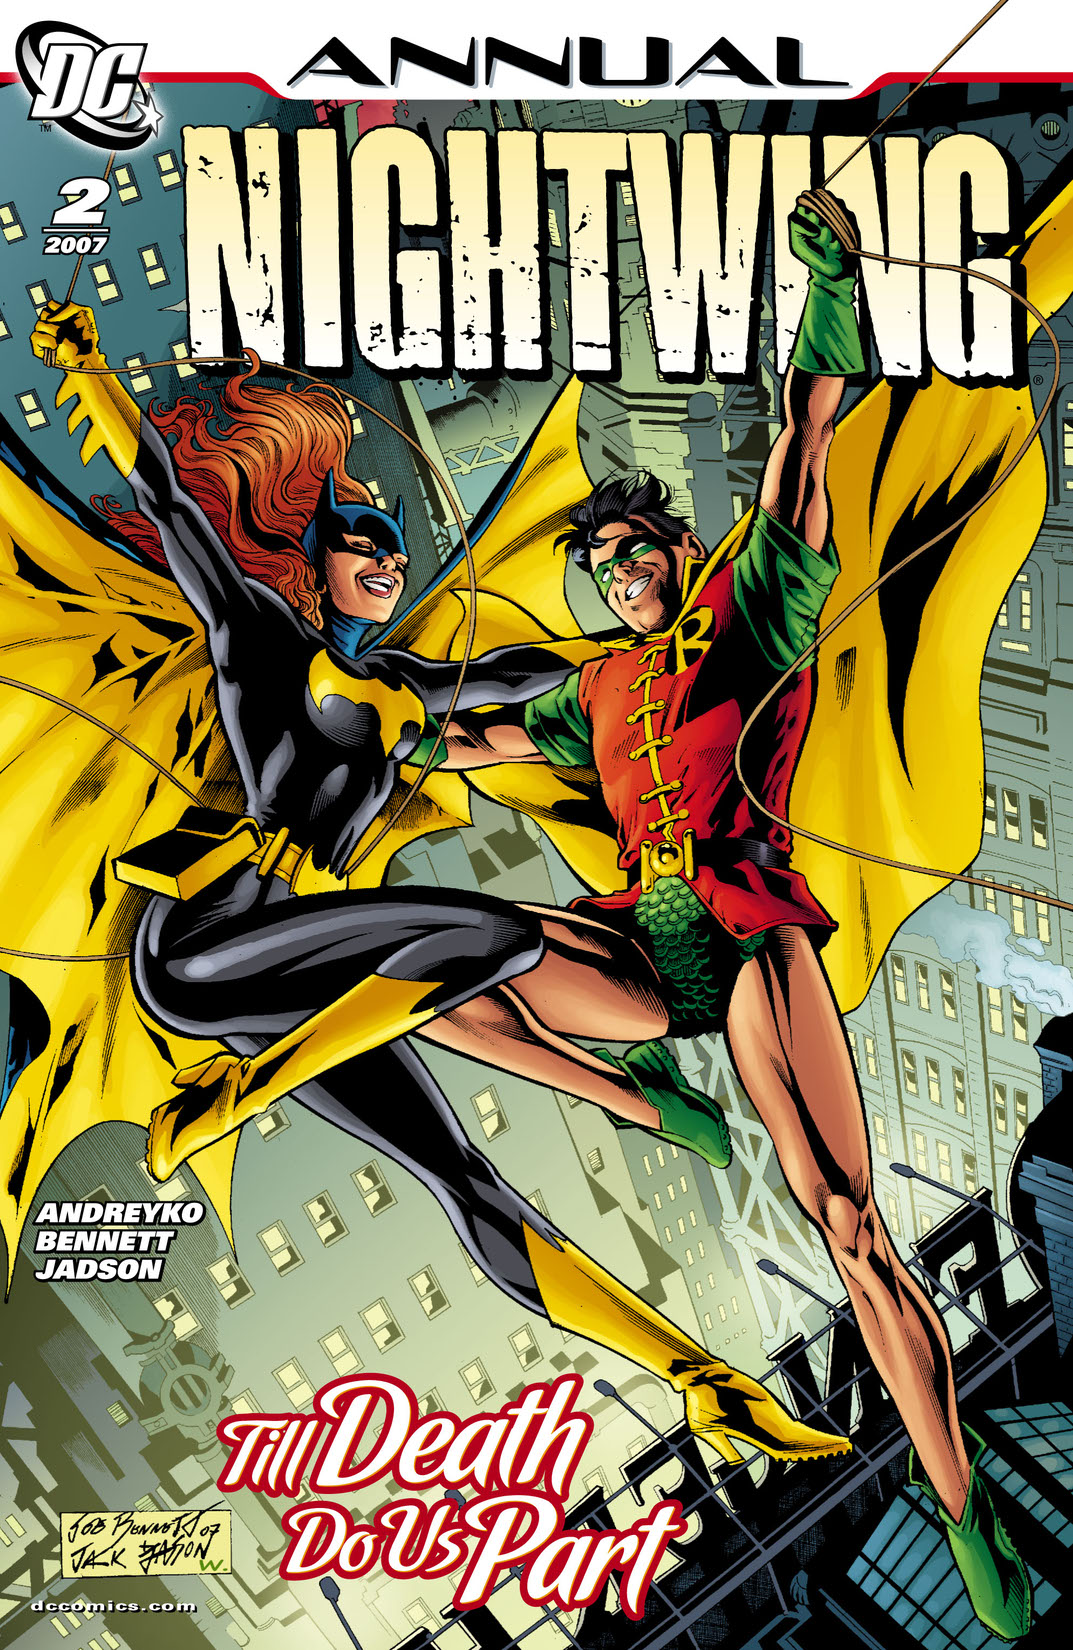 Nightwing Annual (1997-) #2 preview images